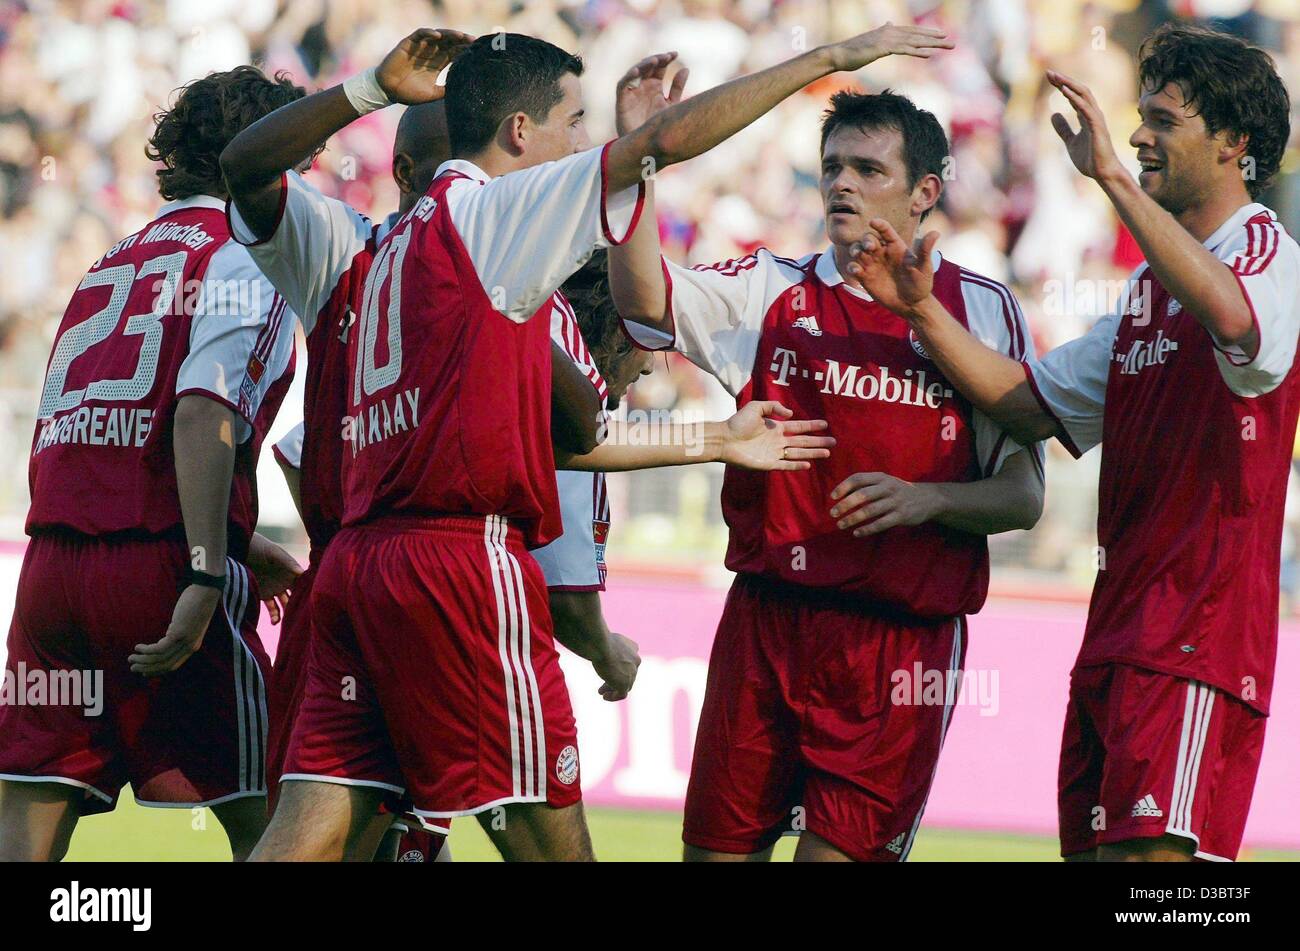 (dpa) - Bayern's players Michael Ballack (R) and Willy Sagnol (2nd from R) congratulate Dutch goalscorer Roy Makaay (2nd from L) during the Bundesliga game opposing FC Bayern Munich and Bayer 04 Leverkusen in Munich, 20 September 2003. The game ended in a 3-3 draw. Leverkusen currently ranks second, Stock Photo